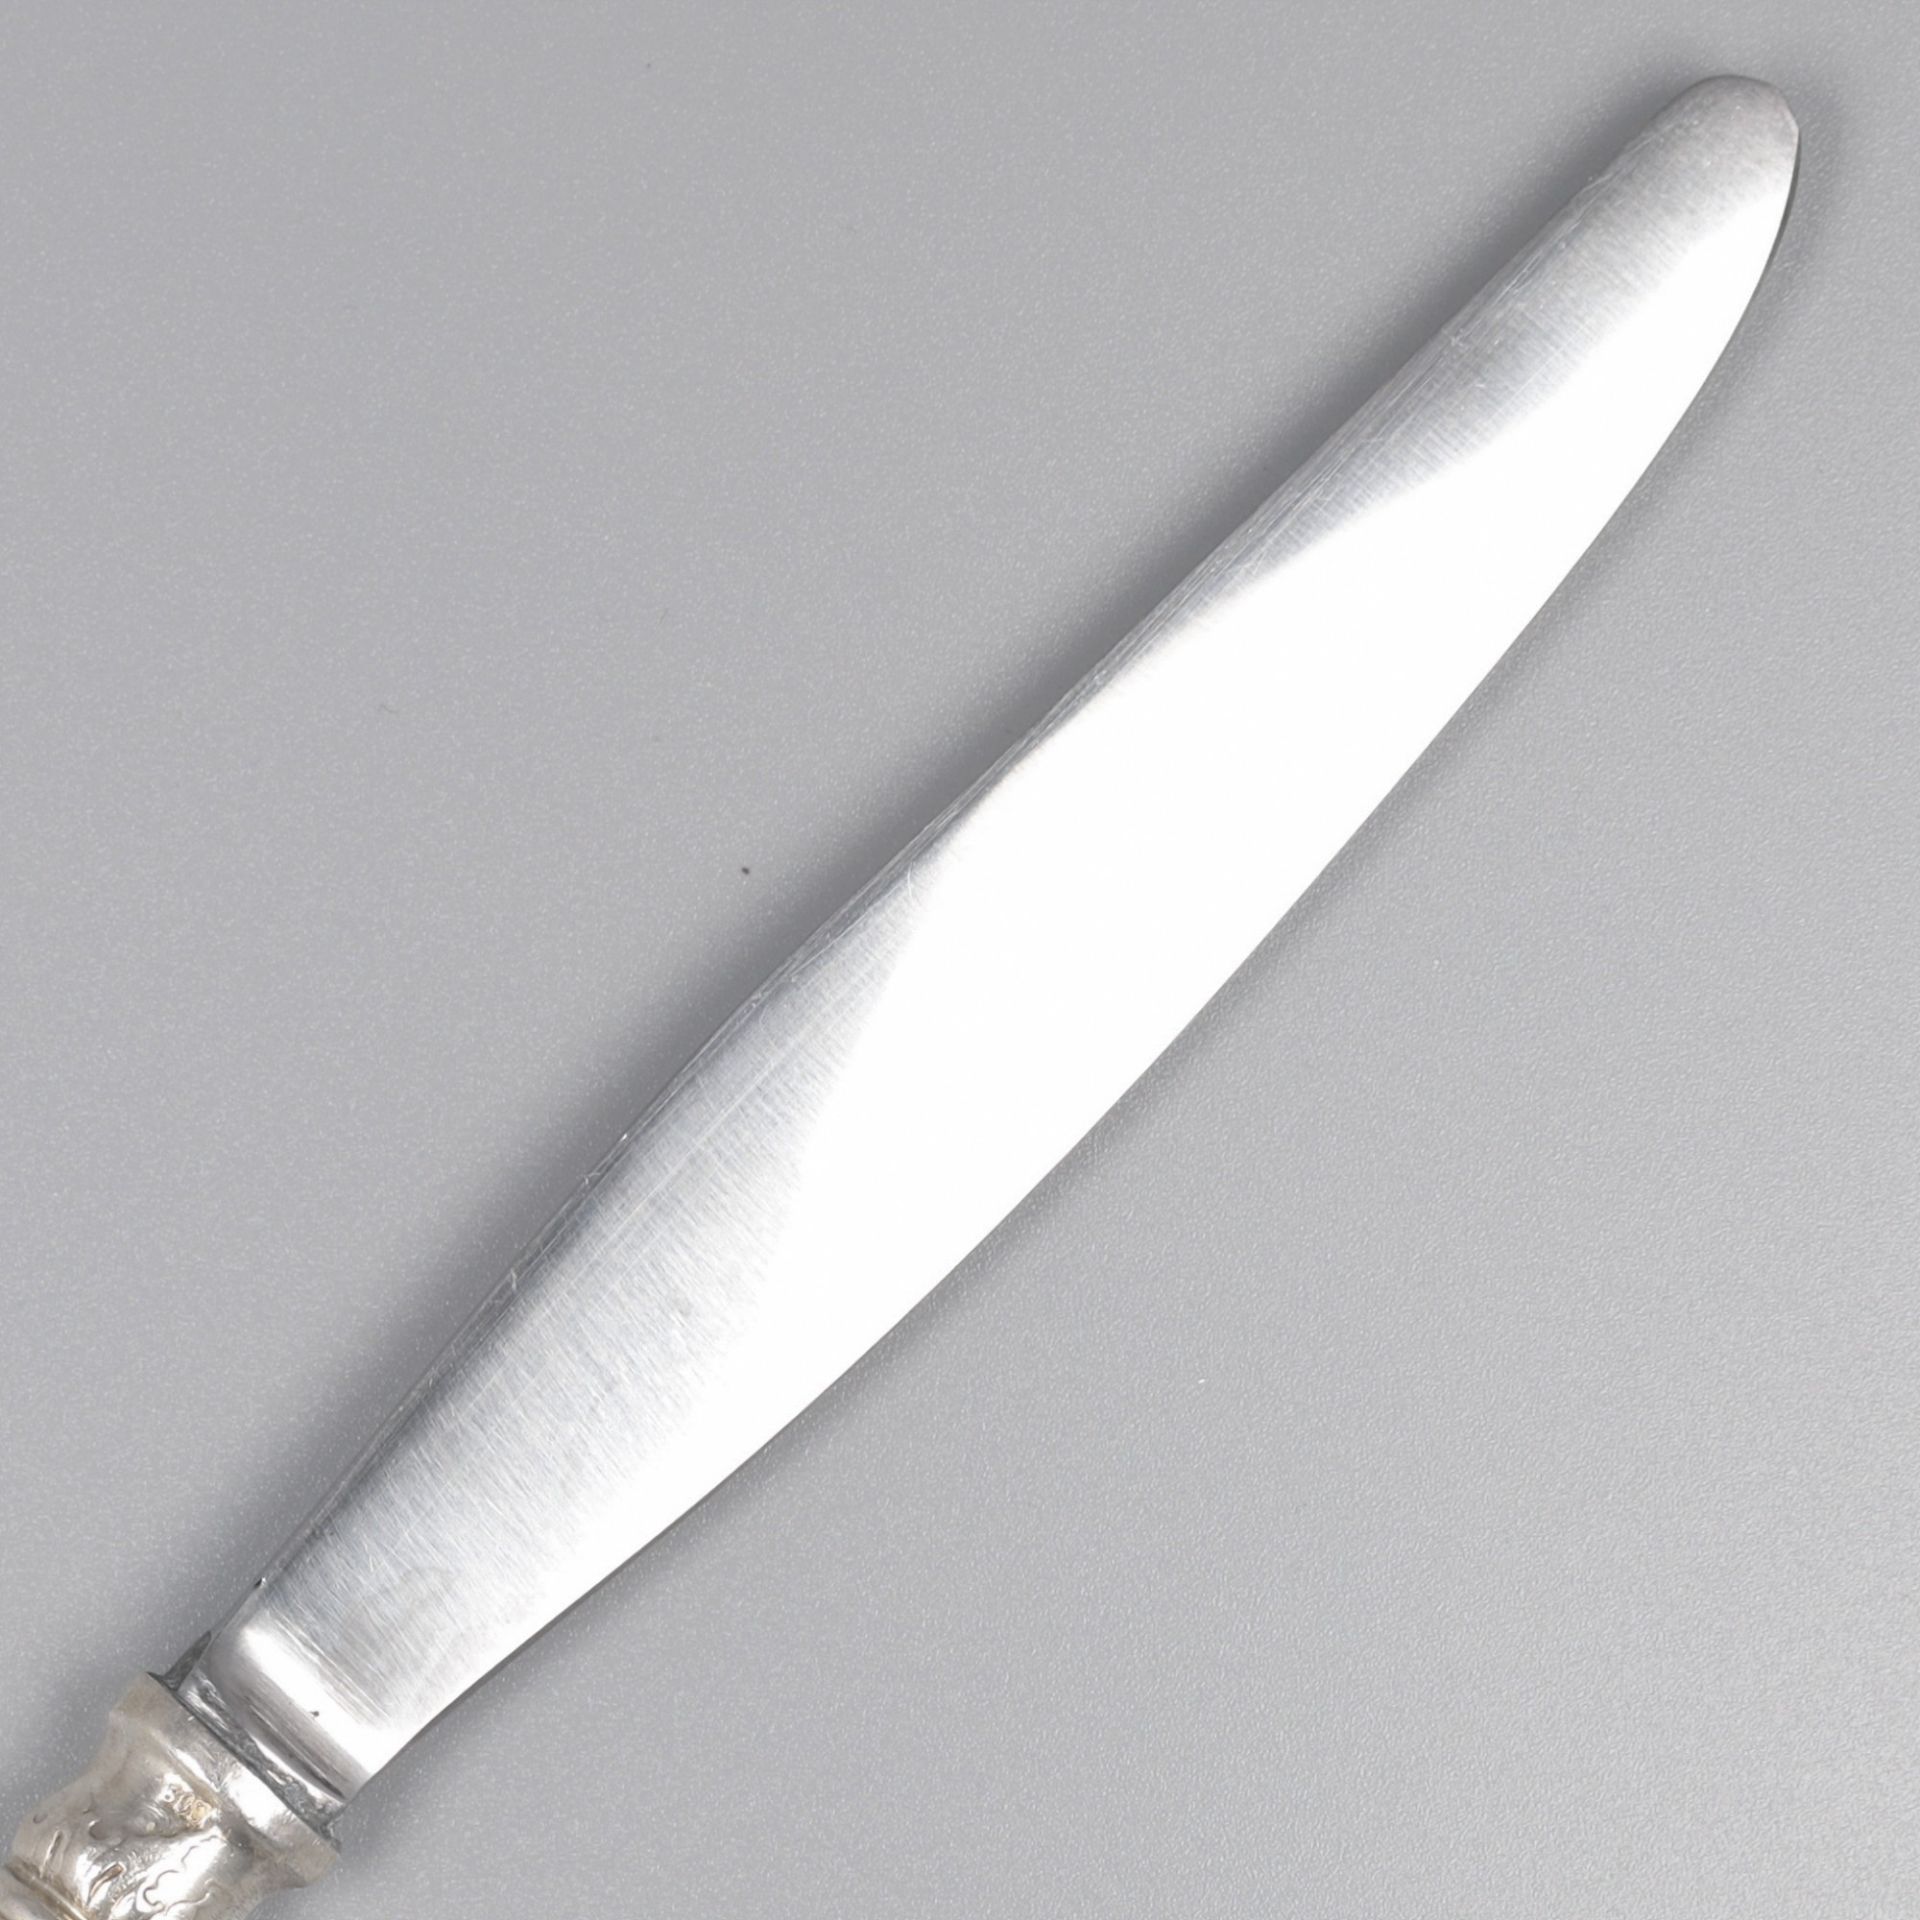 No reserve - 10-piece set of knives silver. - Image 5 of 7